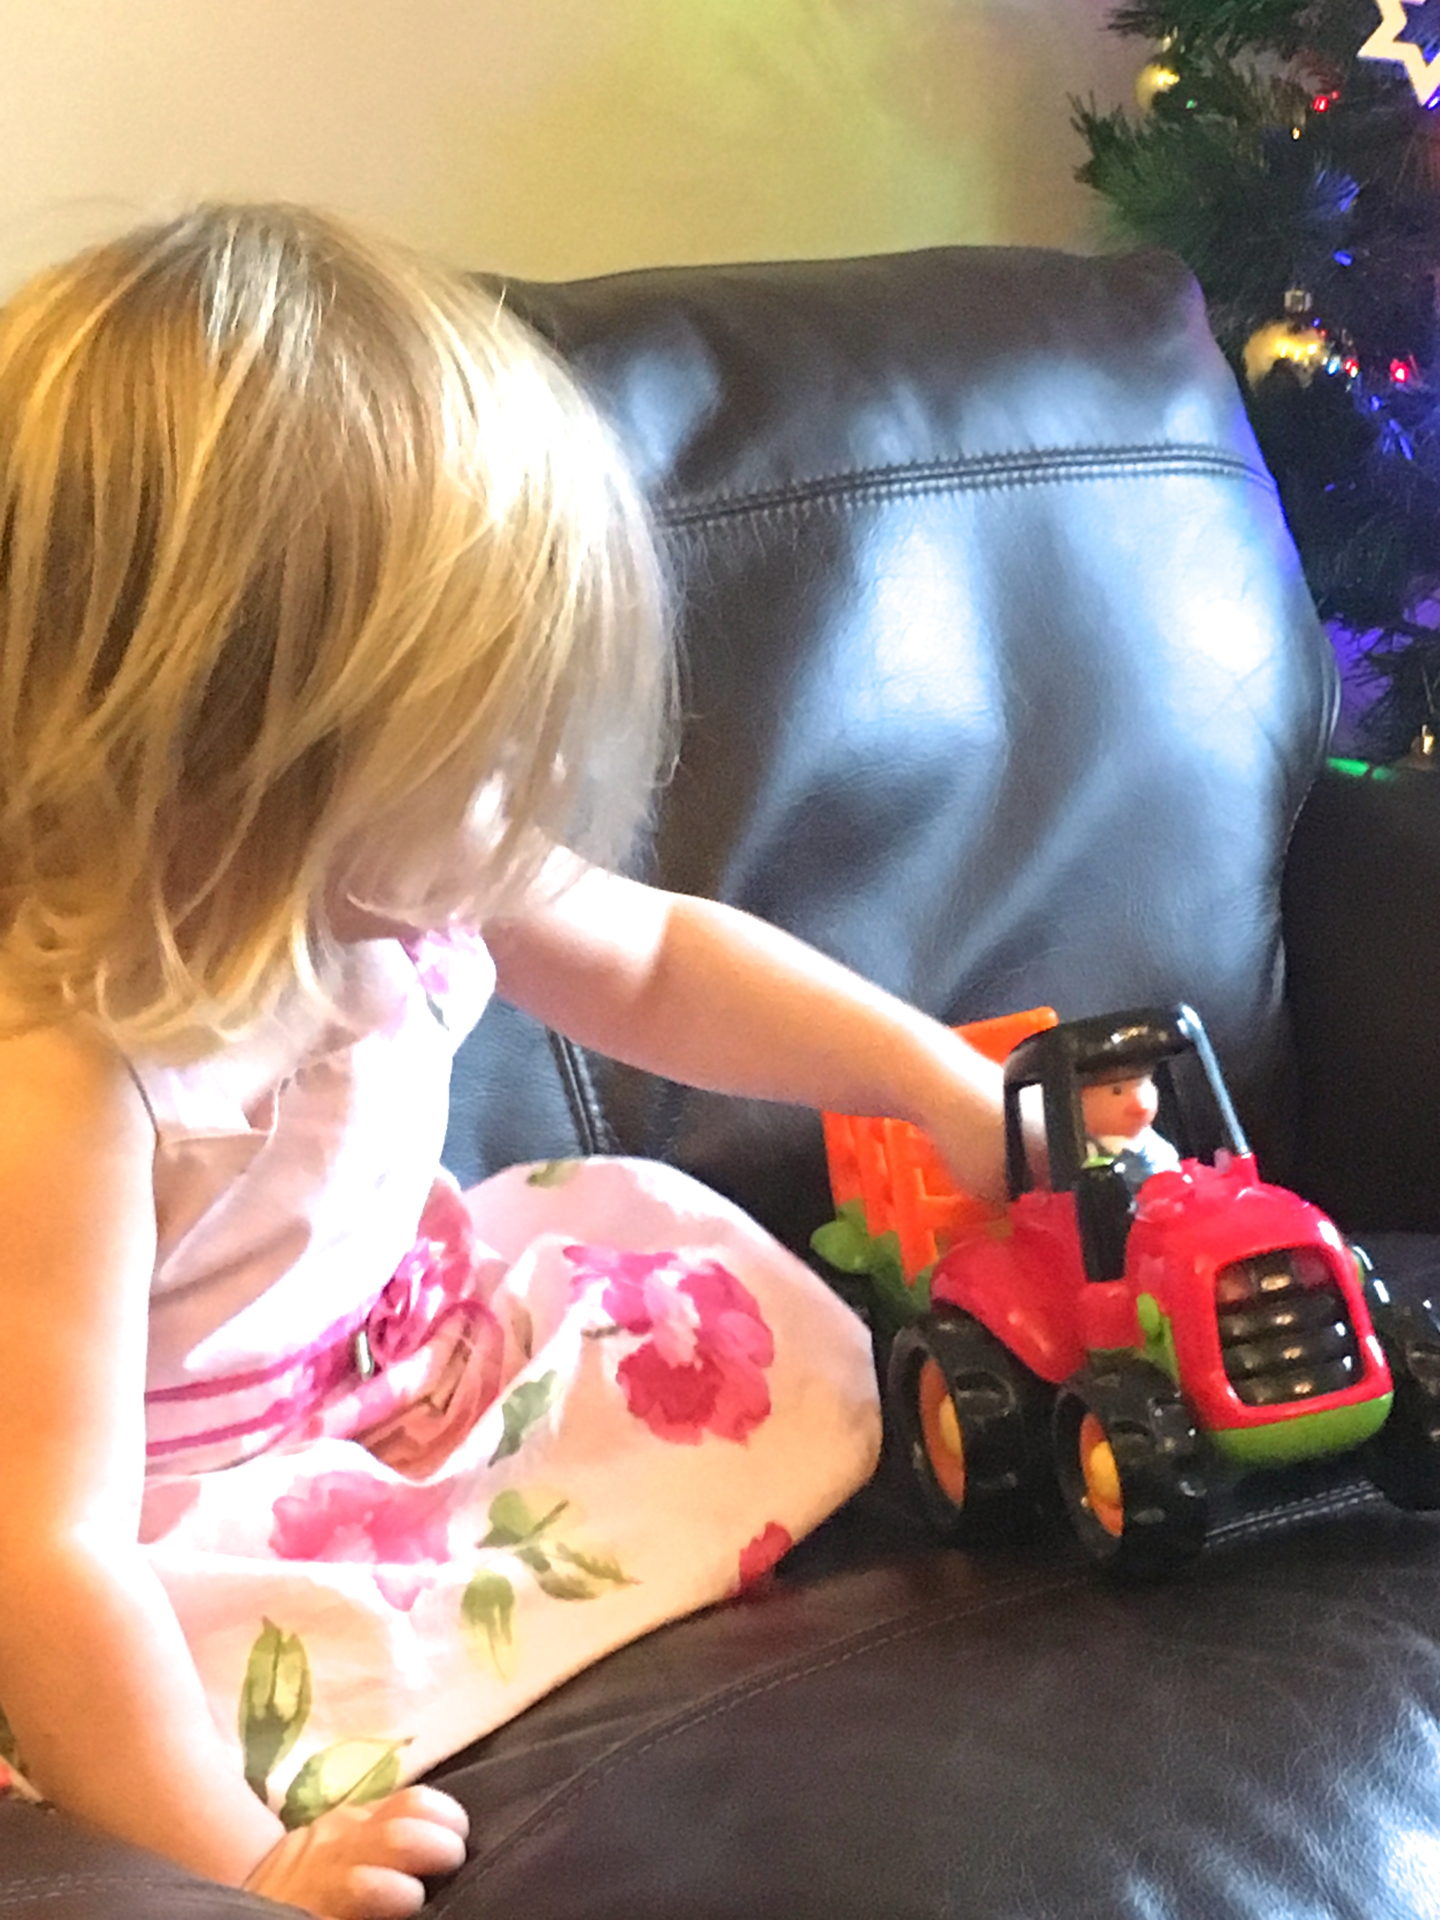 22 month old in pink dress playing with tractor toy